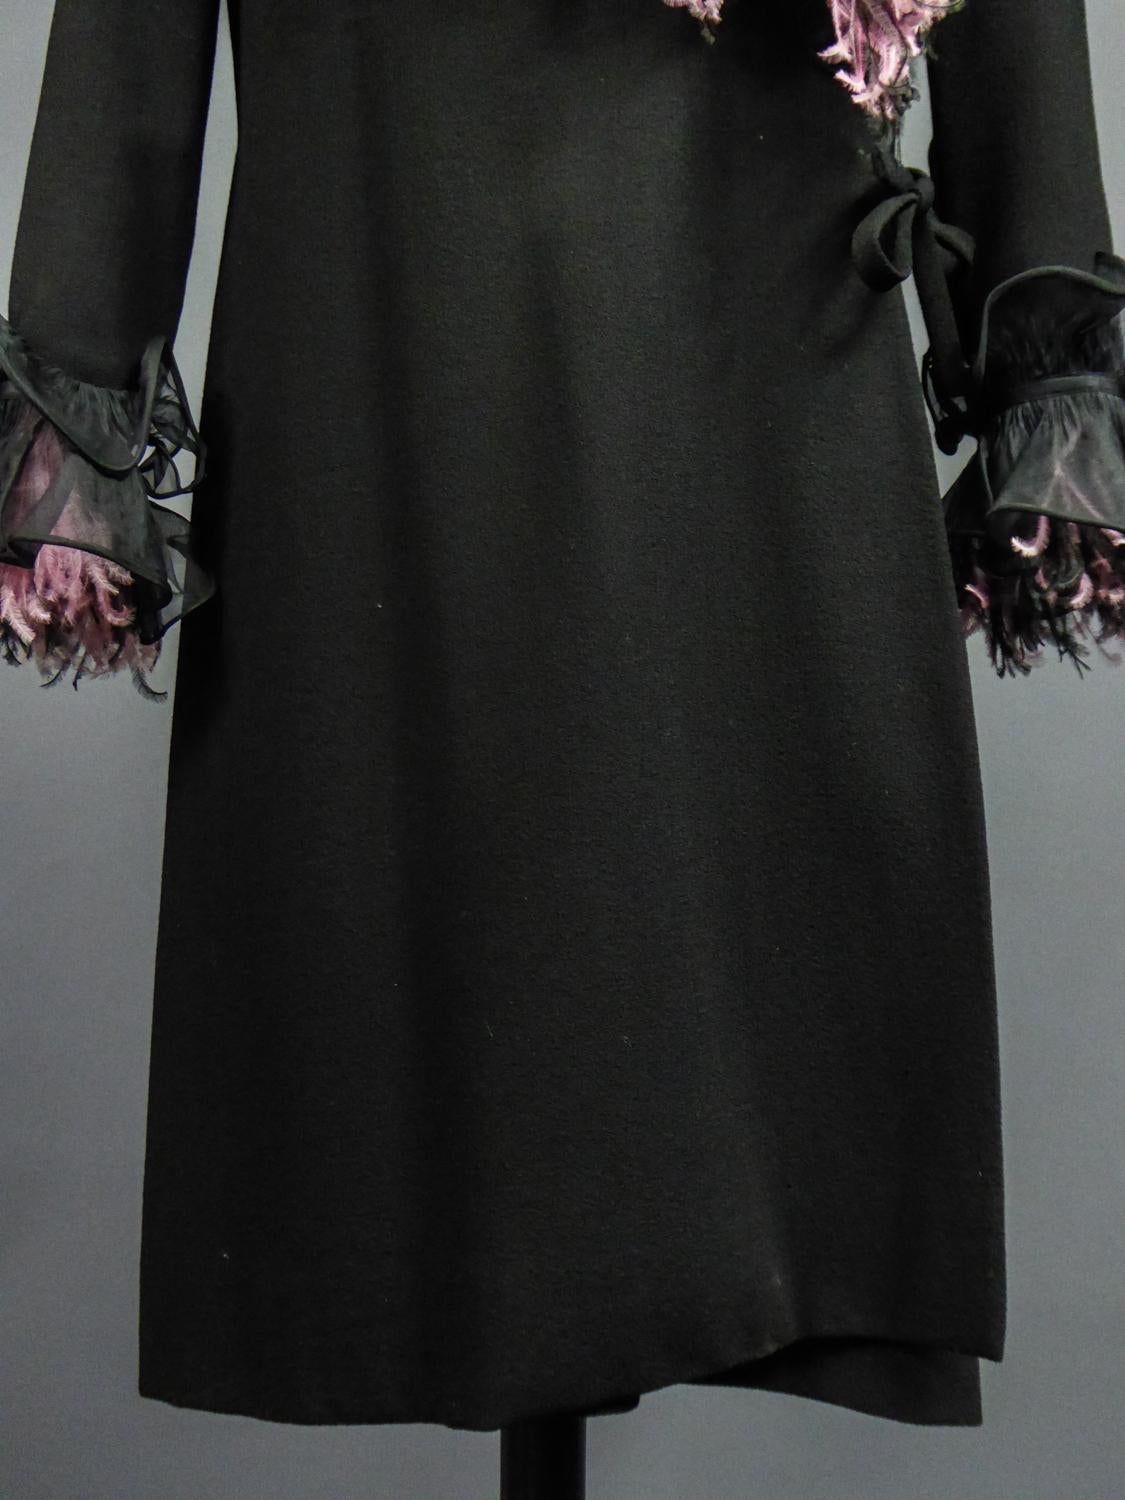 An Yves Saint Laurent Haute Couture Coat Dress Numbered 29390 Circa 1970/1980 For Sale 3